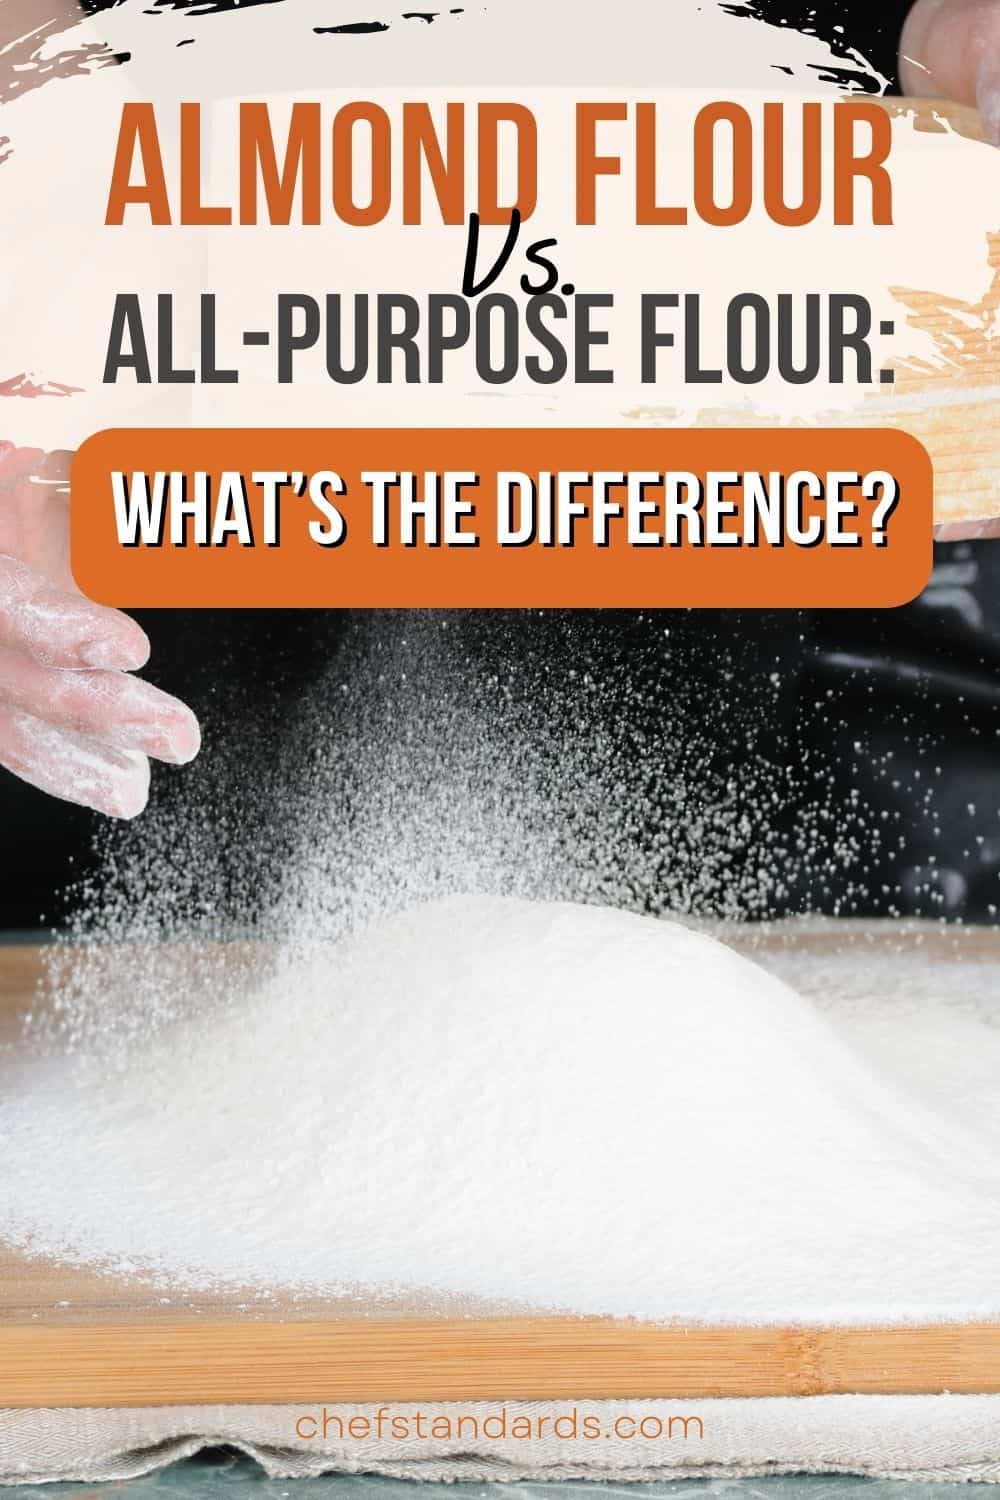 6 Differences Between Almond Flour Vs All Purpose Flour
